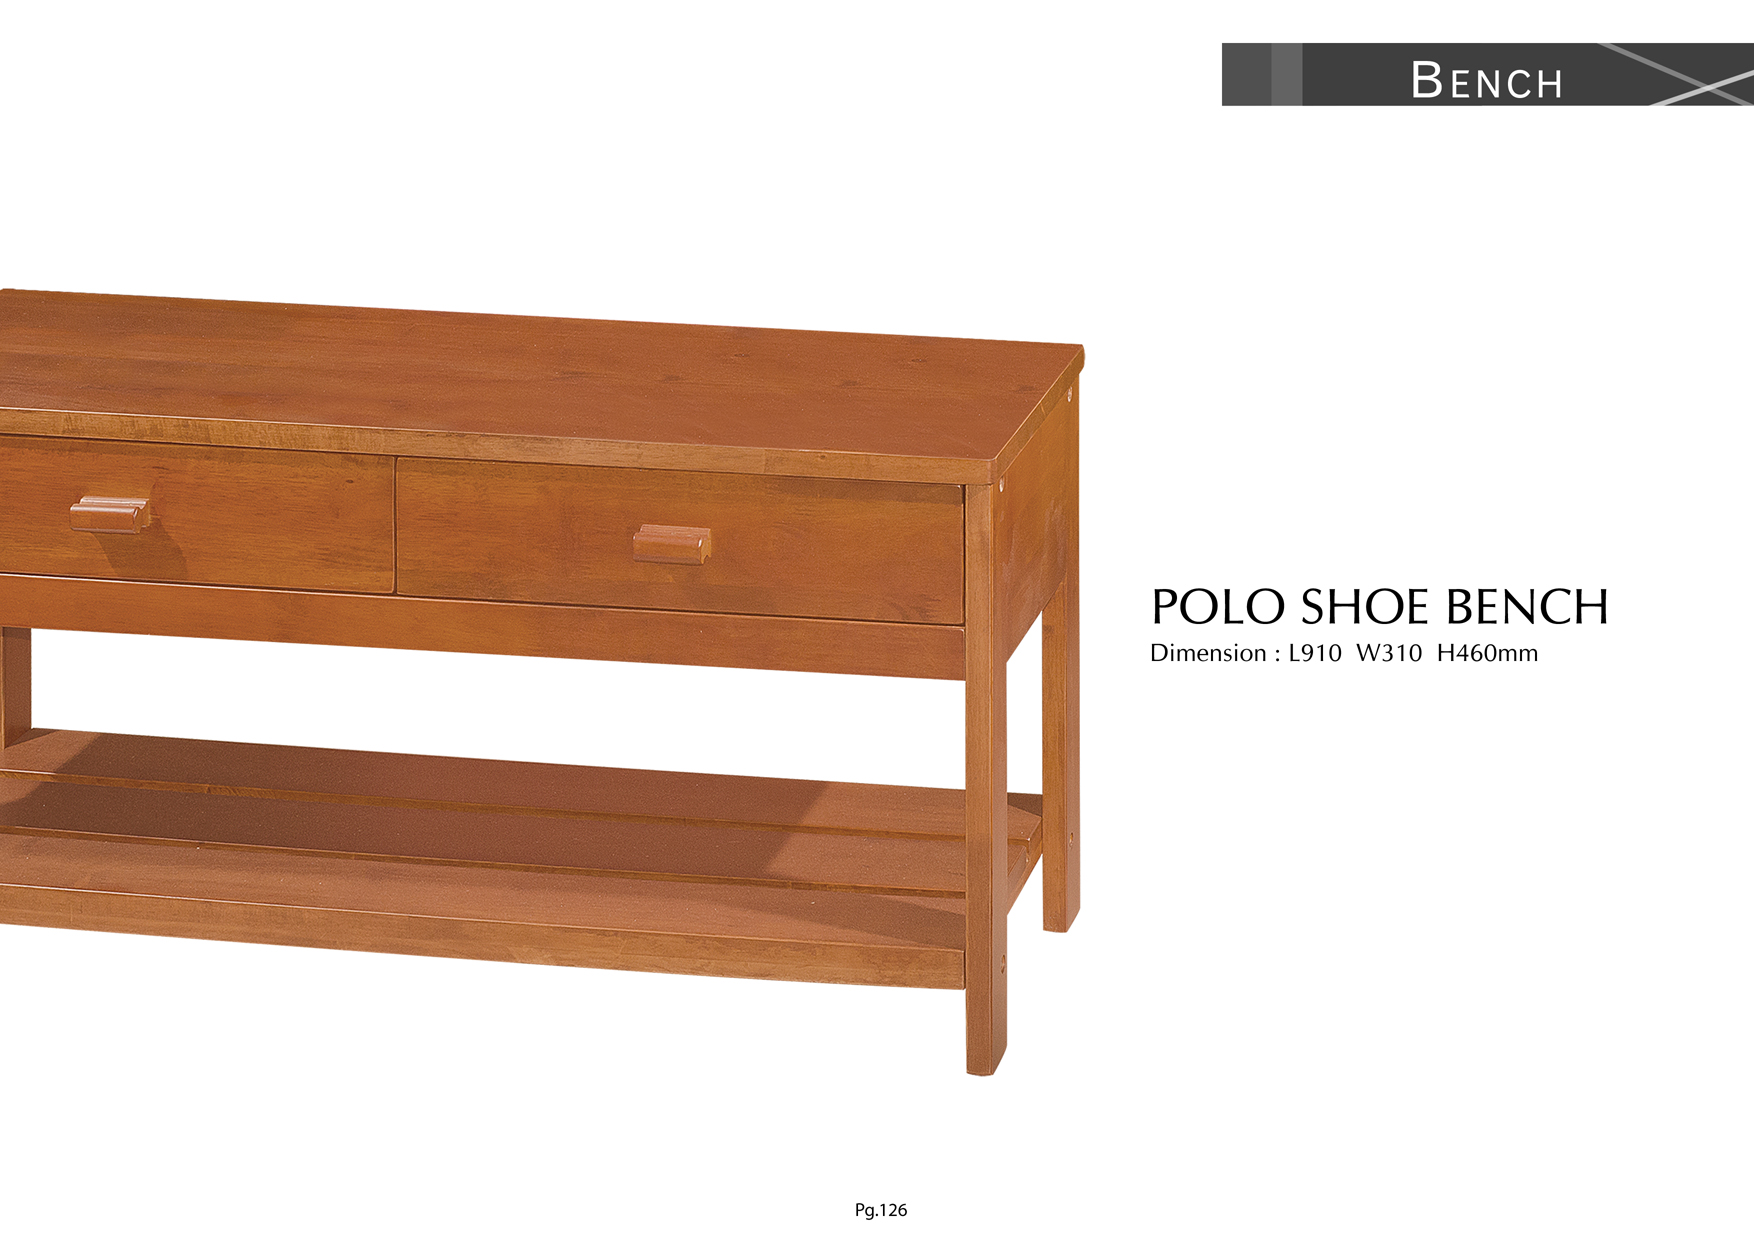 Product: PG126. POLO SHOE BENCH